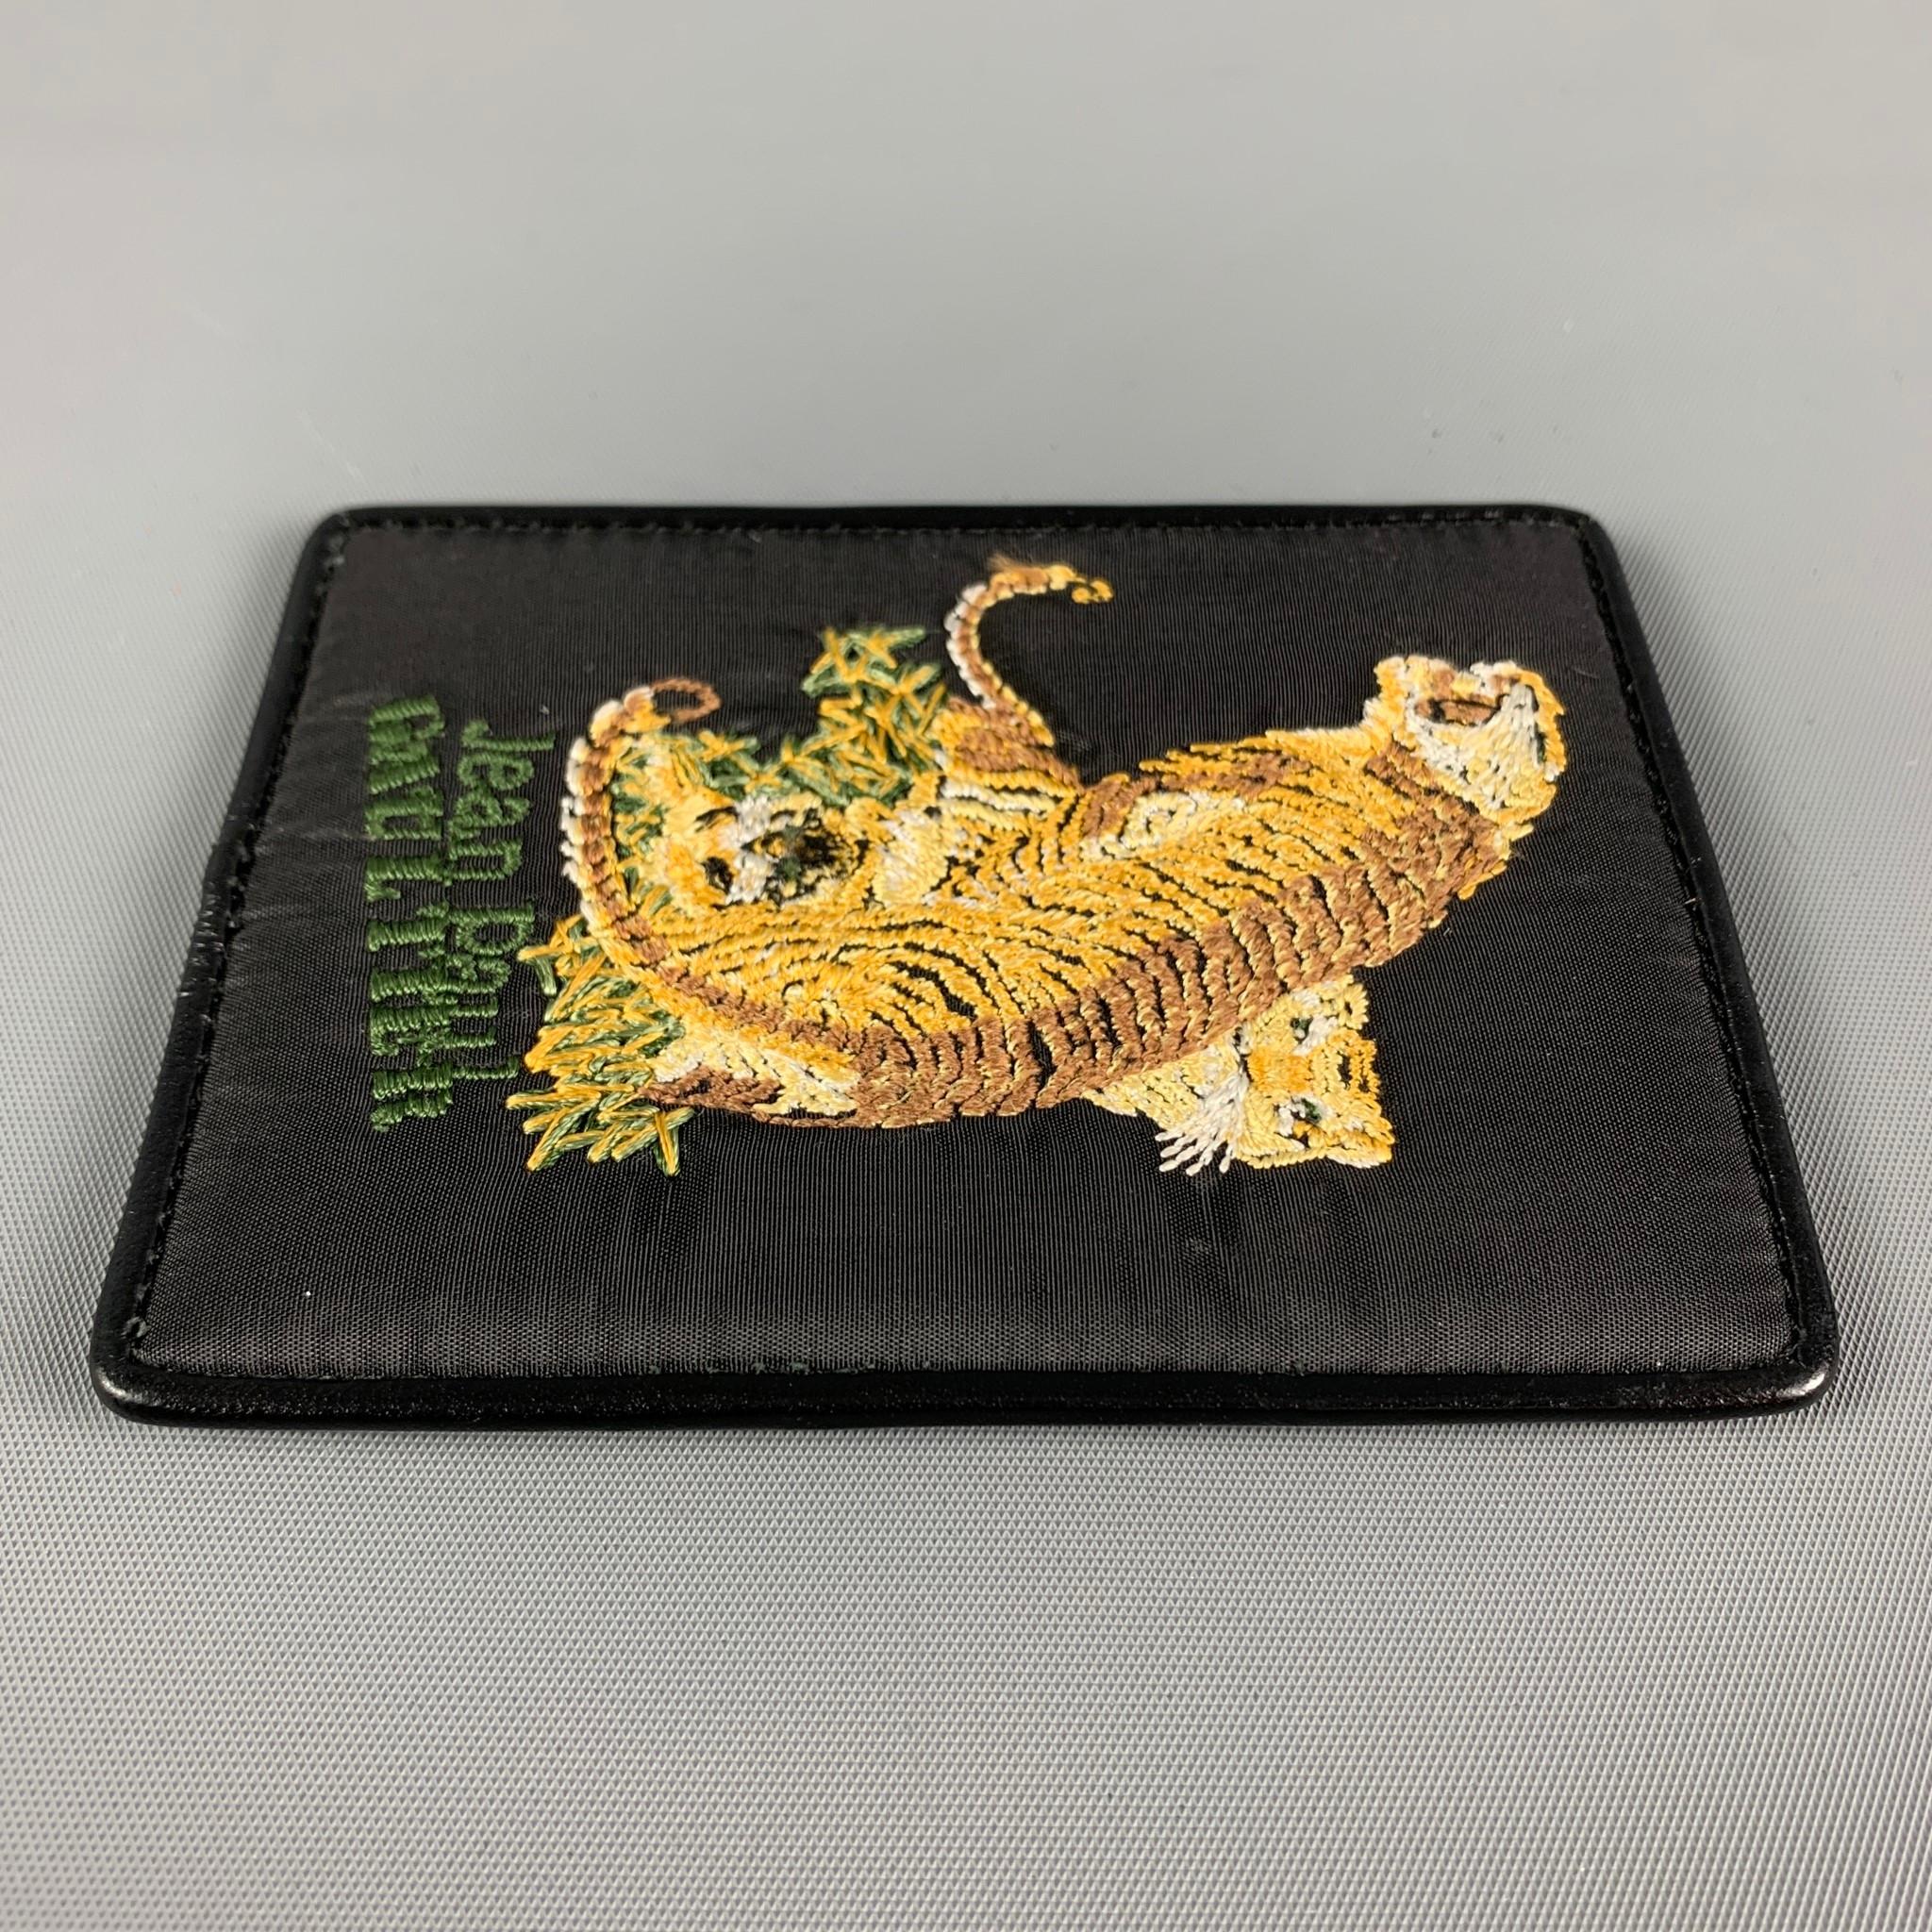 JEAN PAUL GAULTIER card holder comes in a black leather featuring a multi-color tiger embroidered design, double slots, and a clear sleeve. 

Good Pre-Owned Condition.

Measurements:

Length: 7.5 cm.
Height: 10 cm.